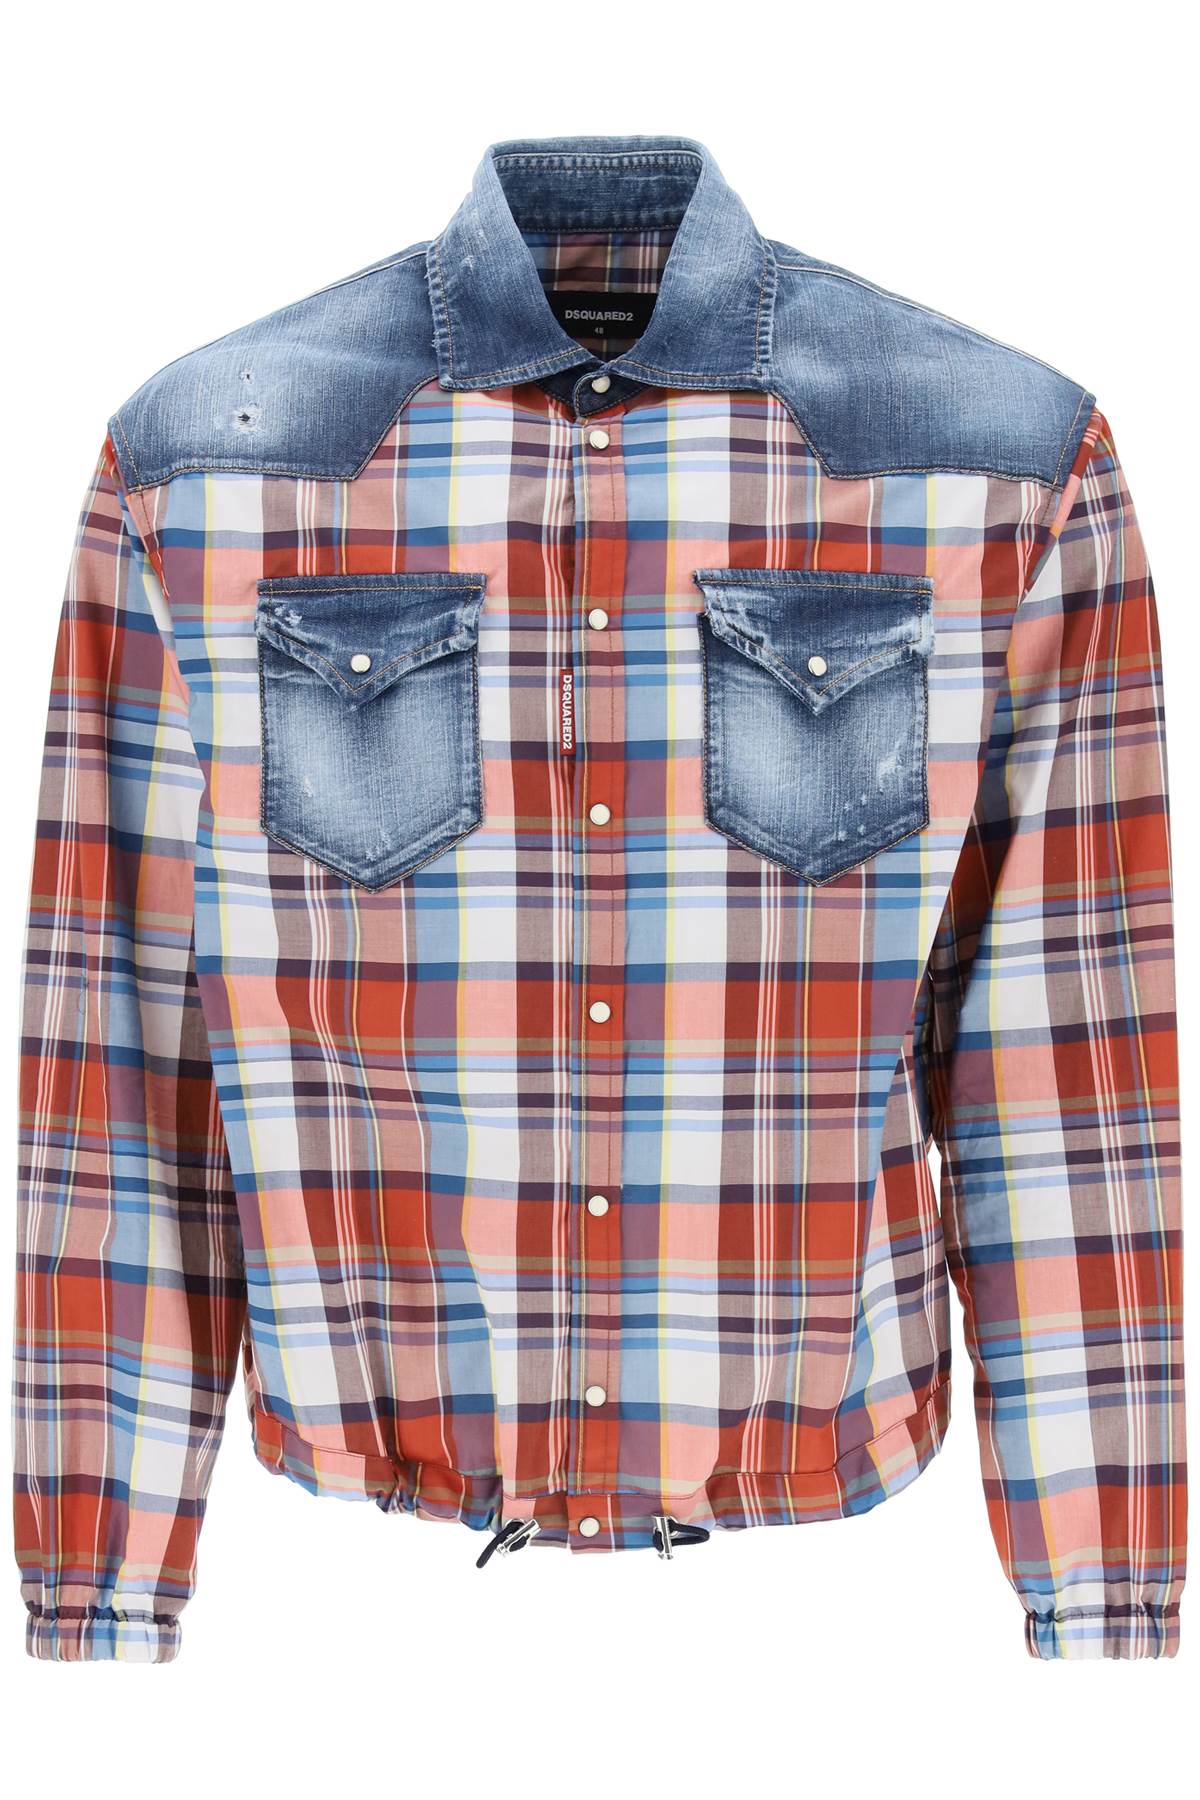 Dsquared2 plaid western shirt with denim inserts-0